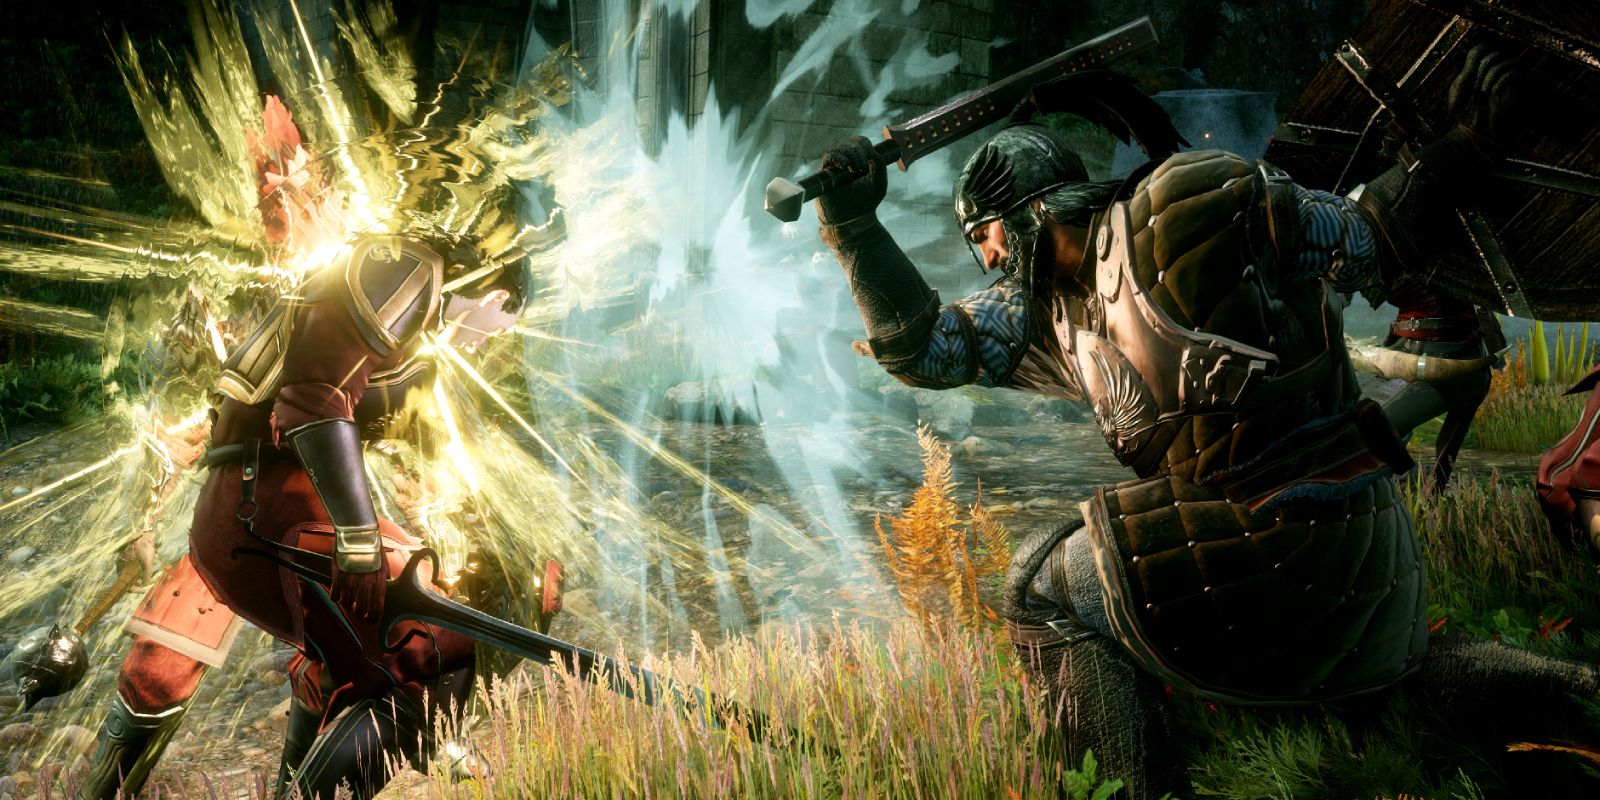 Two characters in Dragon Age: Inquisition fighting with swords and magic